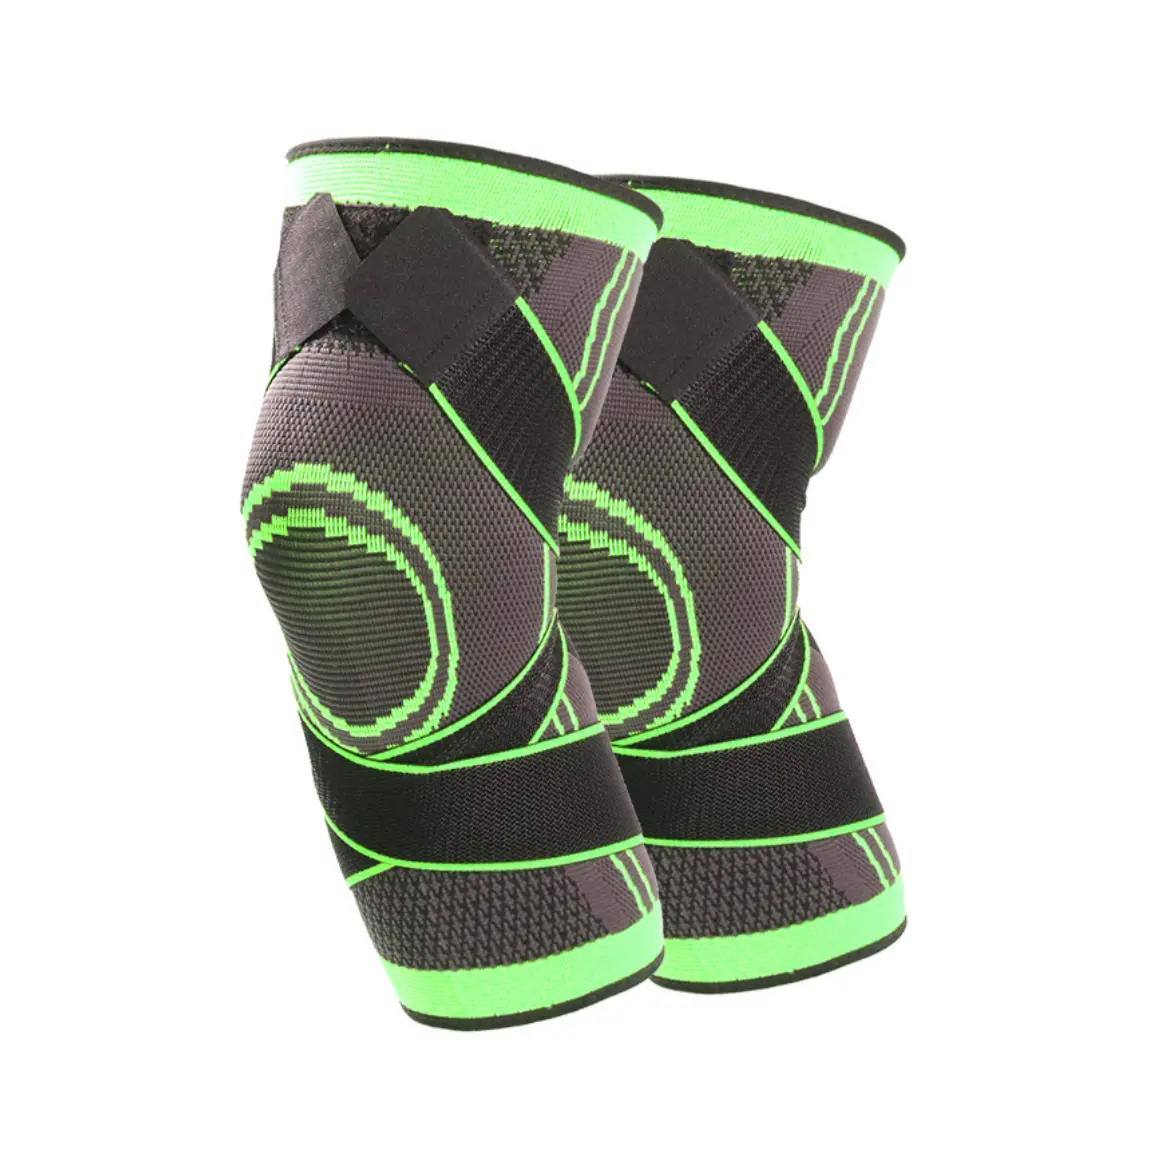 Outdoor knitting exercise kneecap fitness running bandage pressurized knee riding compression knee sleeve with wrap/strap